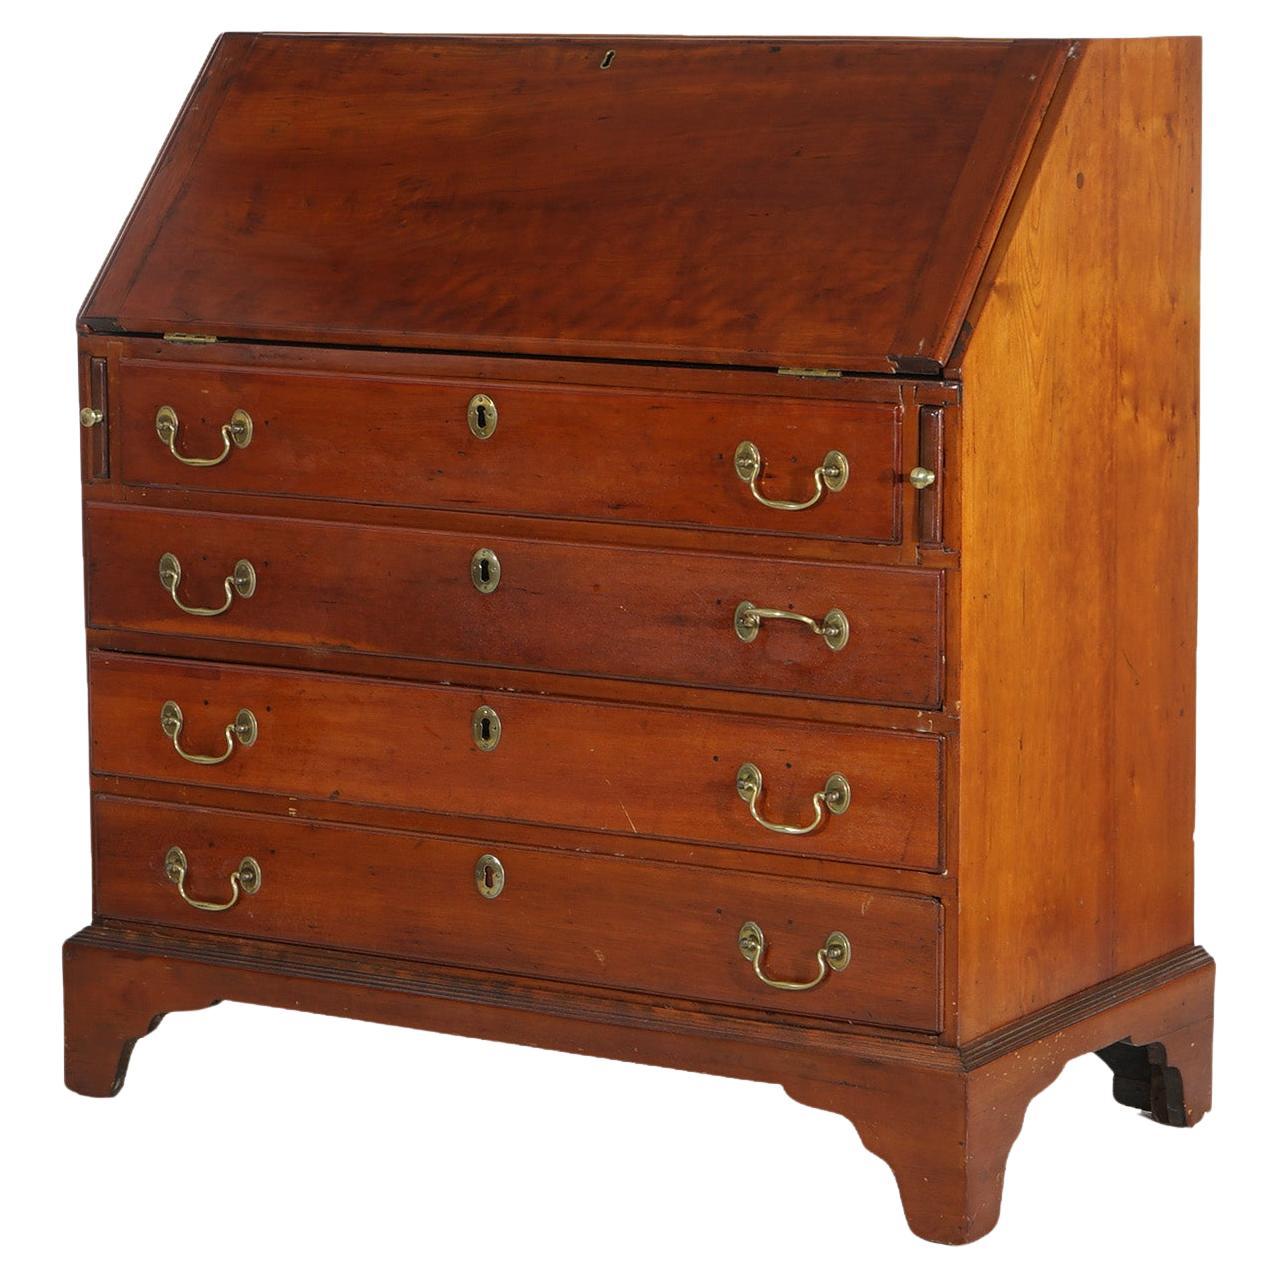 Antique Chippendale Cherry Slant-Front Desk with Four Drawers Circa 1830